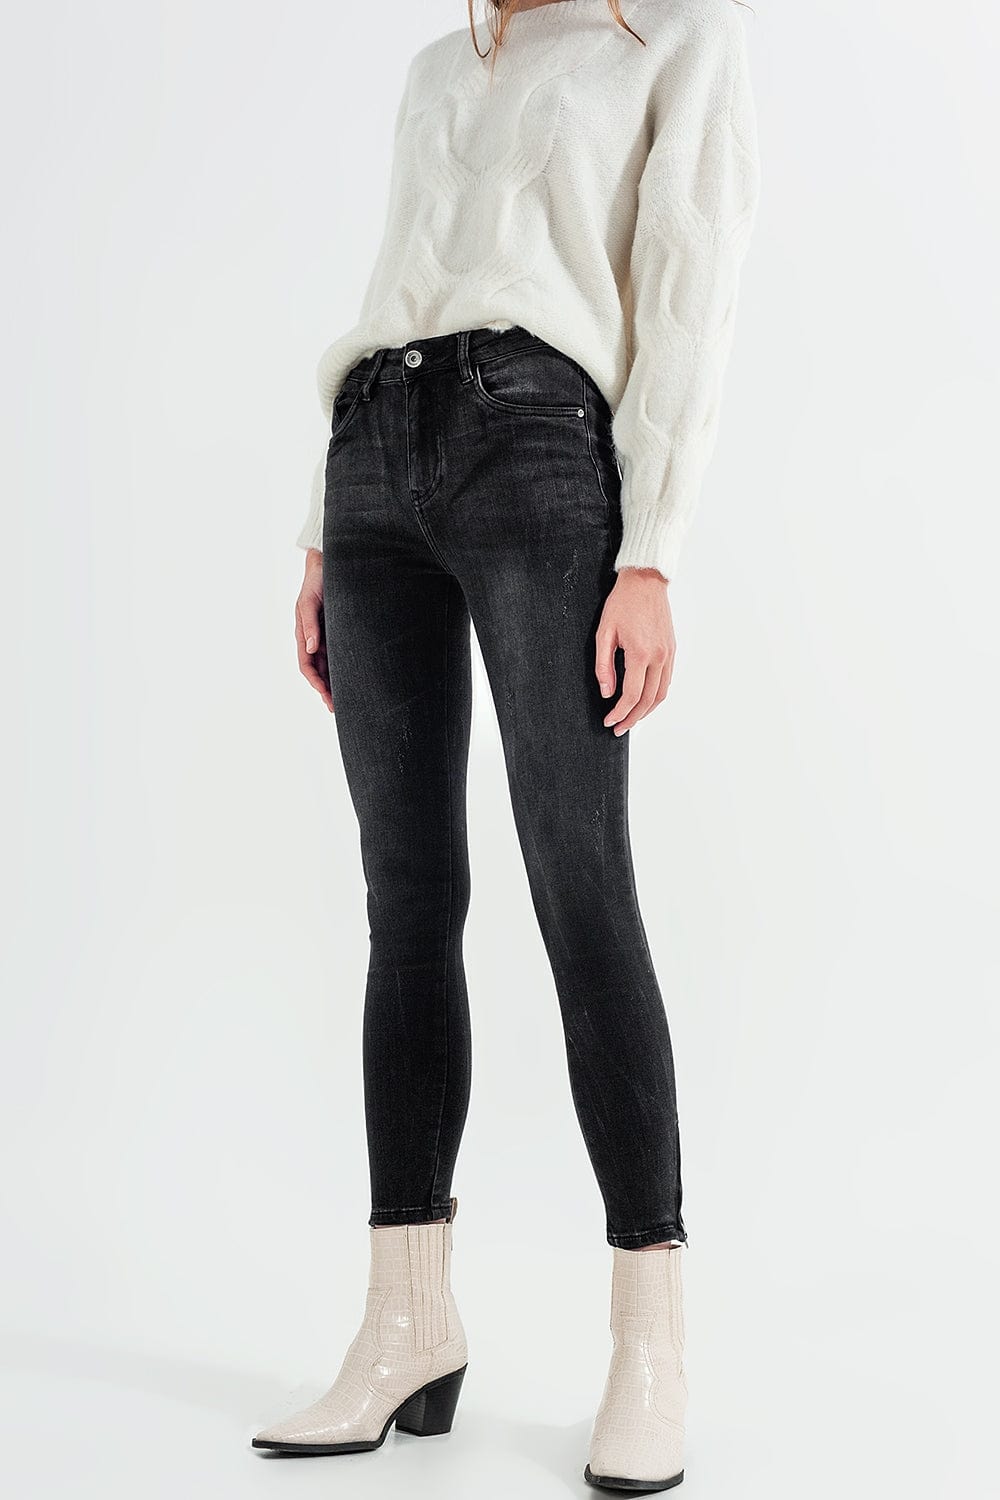 Q2 Women's Pants & Trousers Skinny Jeans with Ankle Zip in Black Wash